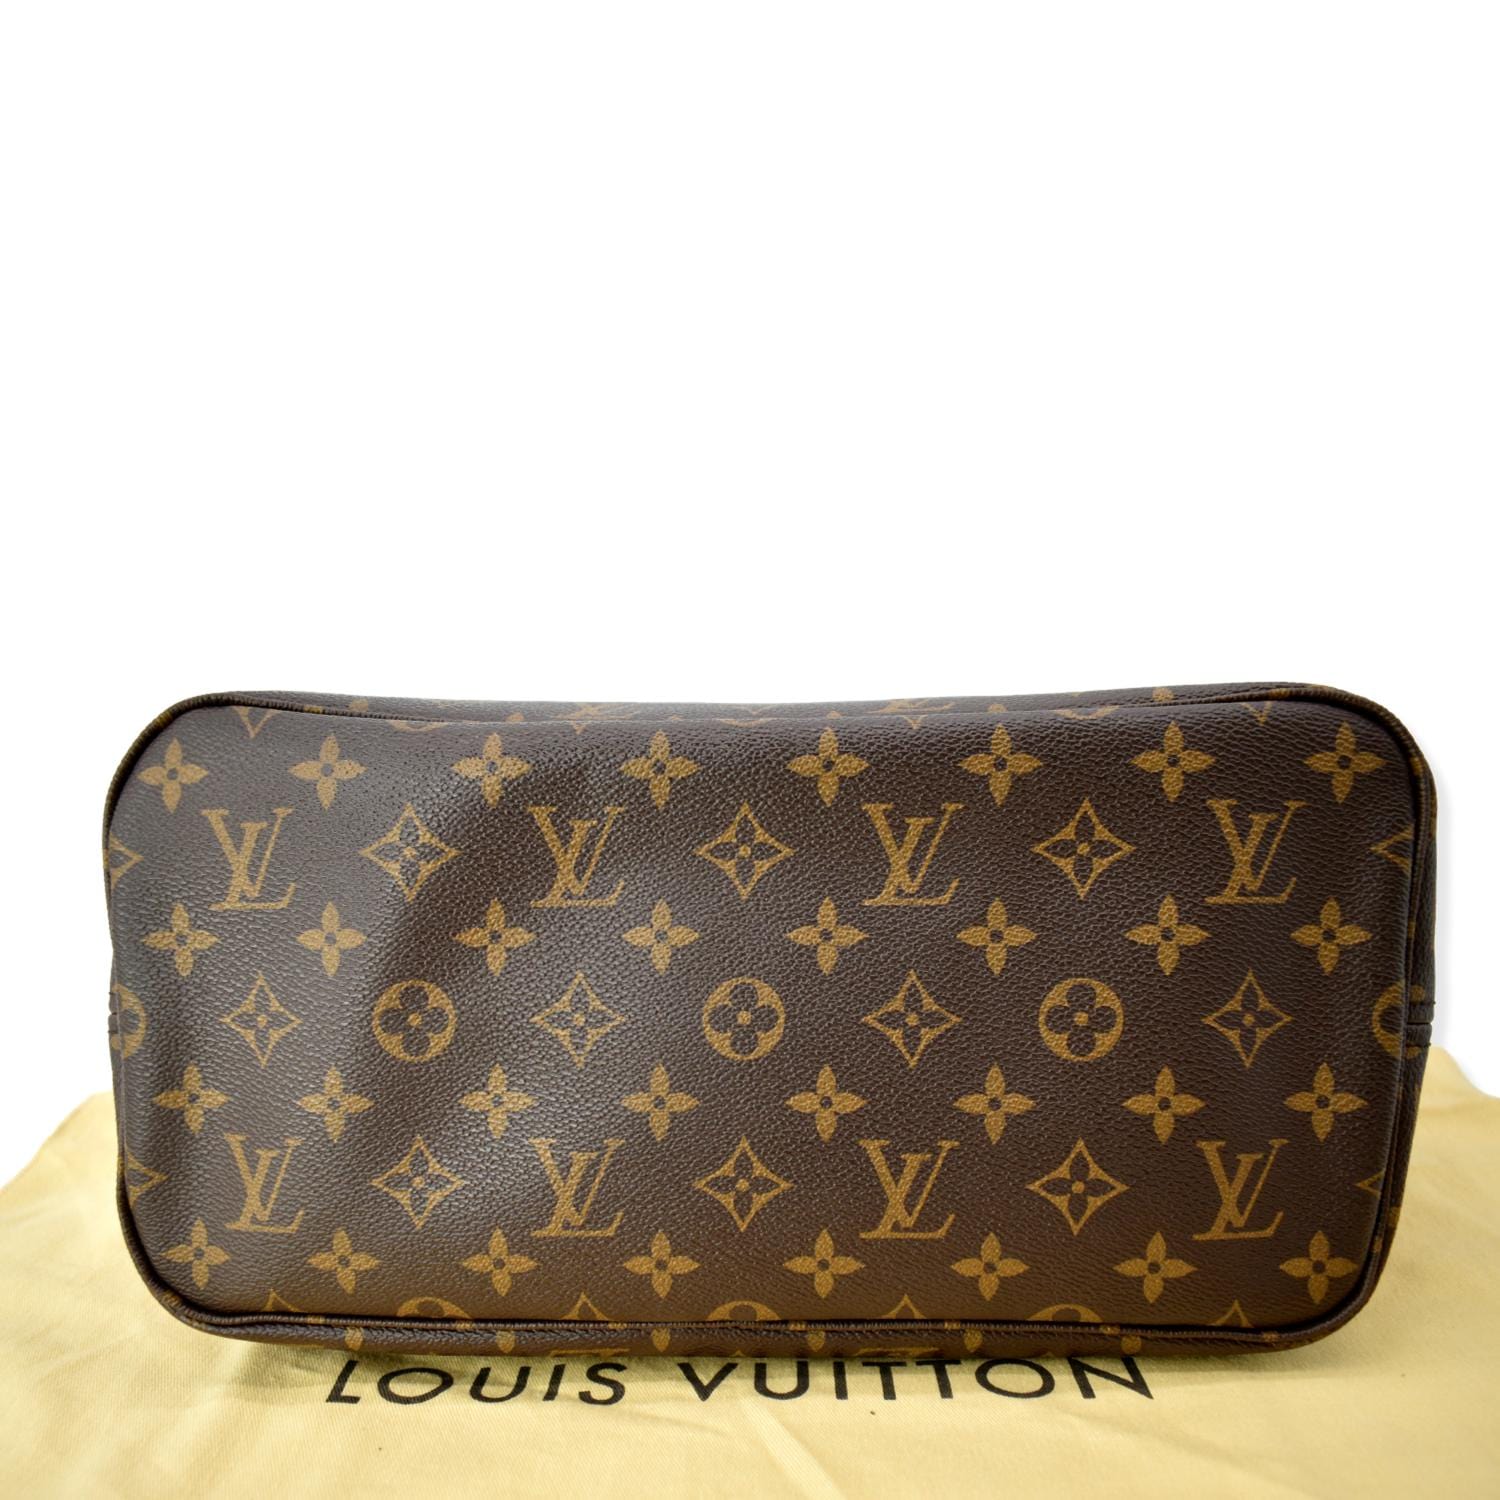 Louis Vuitton x for the World Championship - Brown - MM - Neverfull -  ep_vintage luxury Store - Vuitton - Monogram - M40156 – dct - Tote - Bag -  Louis